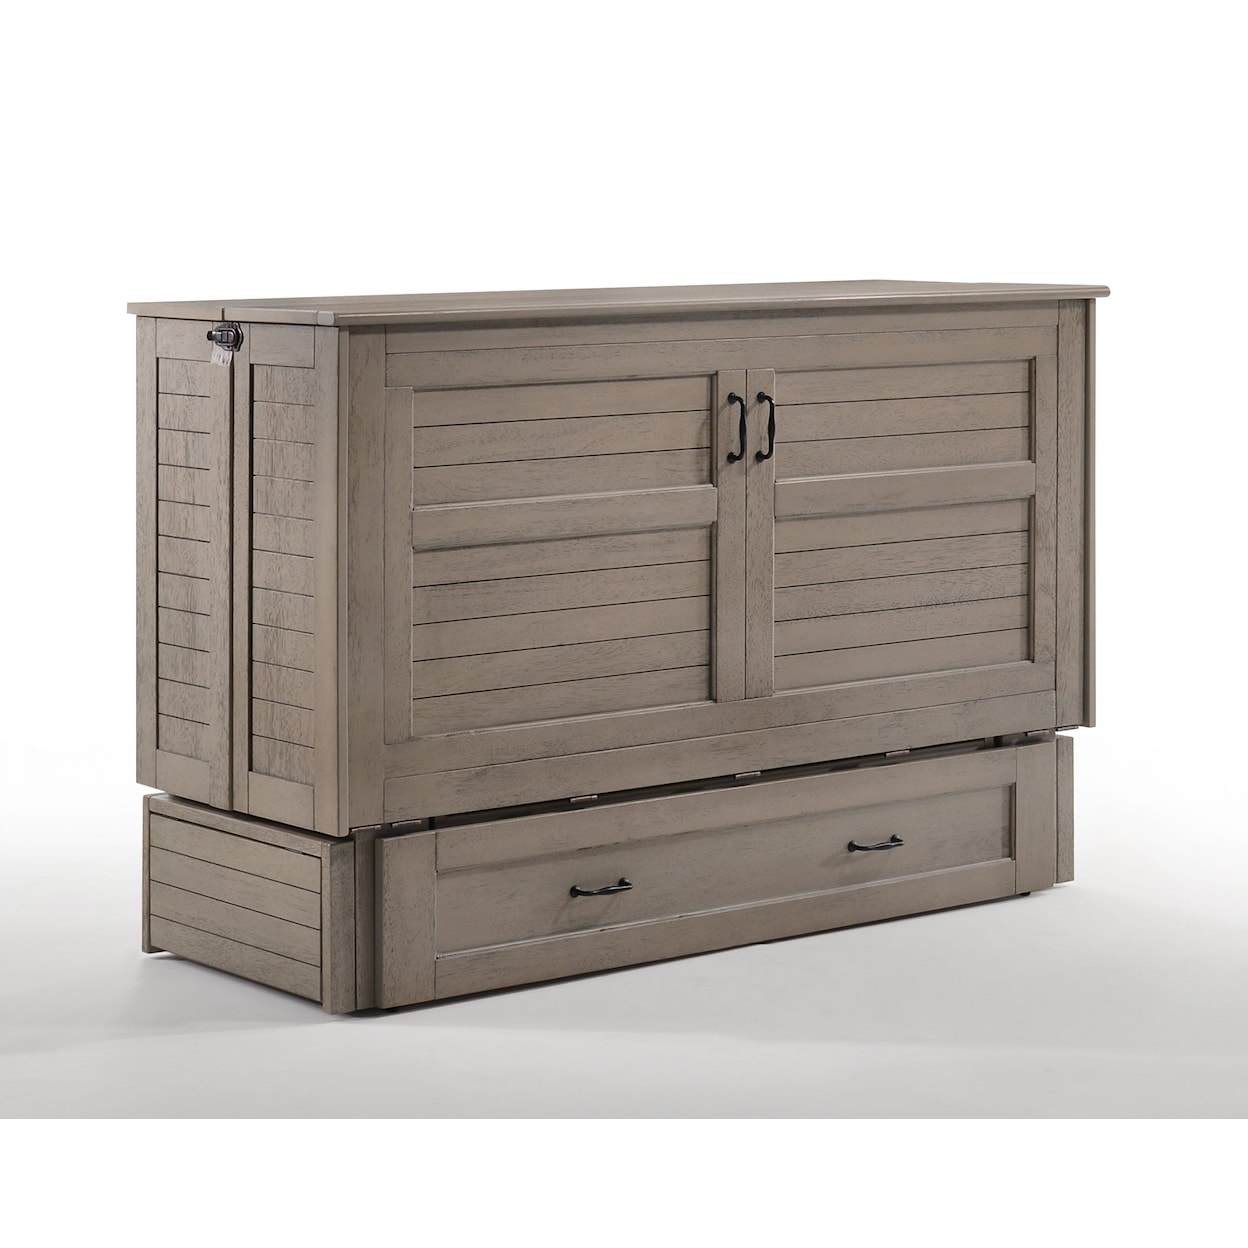 Night & Day Furniture MURPHY BEDS Poppy Murphy Wood Cabinet Bed